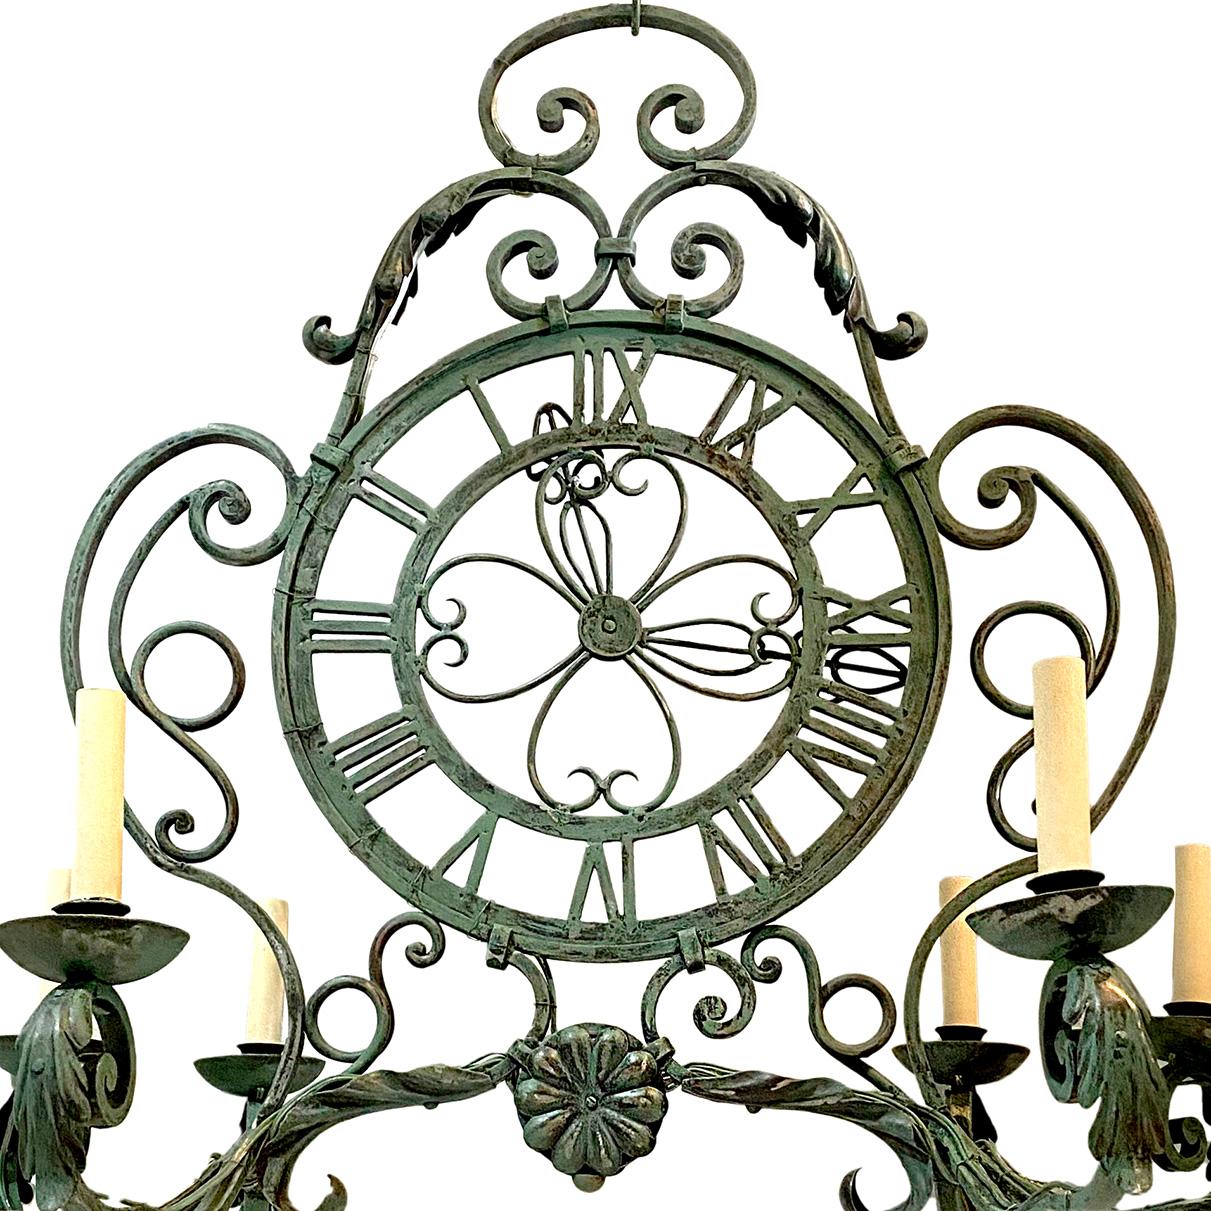 A circa 1940's French hammered iron clock ten-arm chandelier with original painted finish and patina.

Measurements:
Height of body: 32